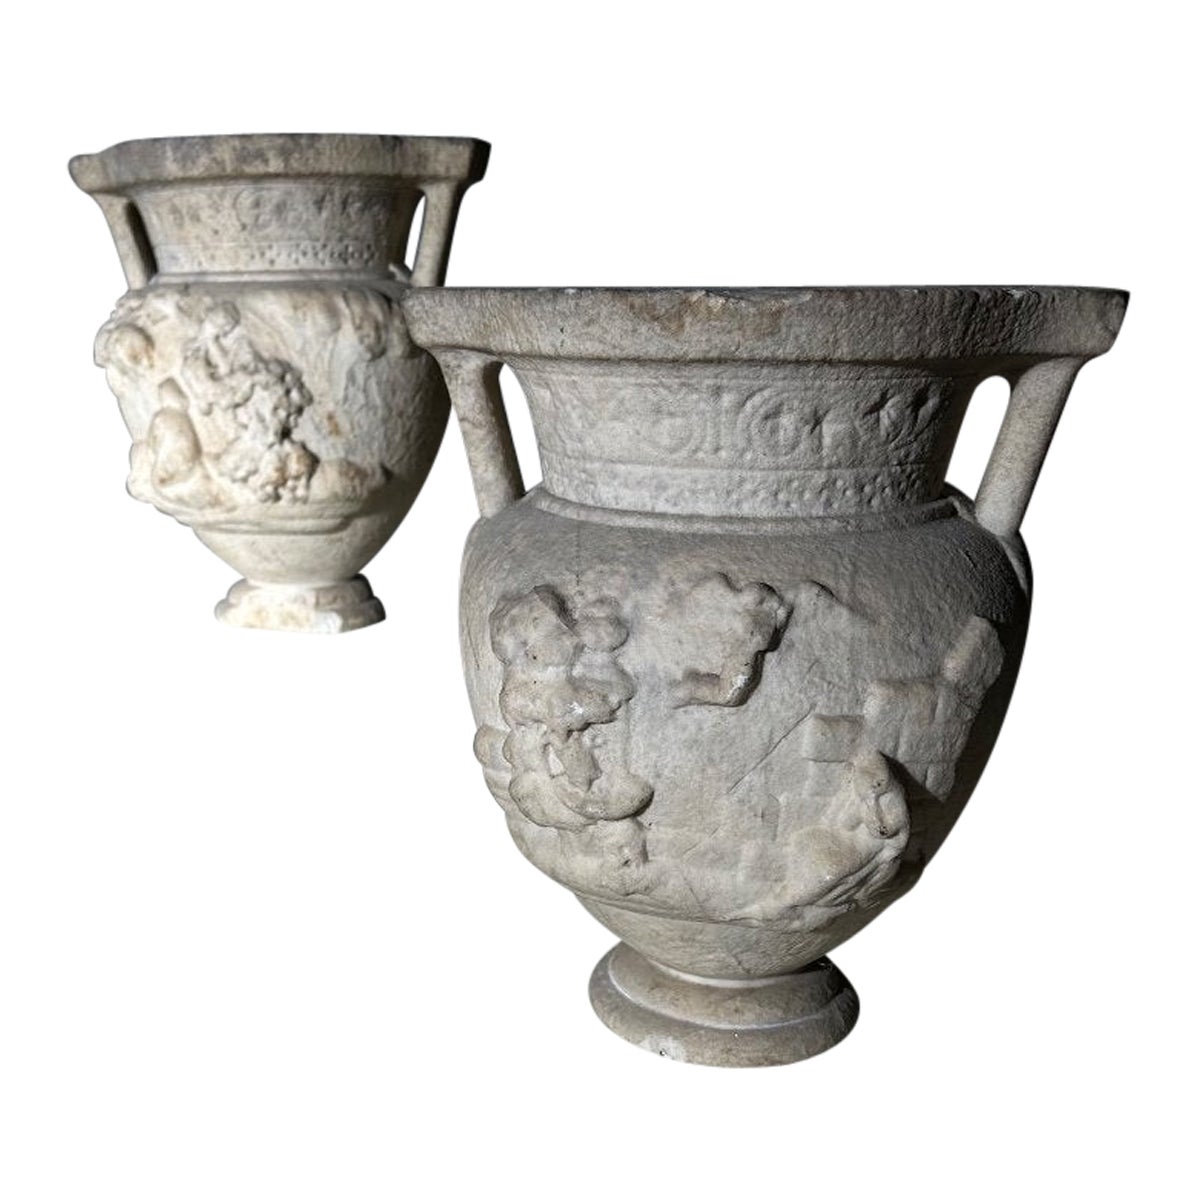 Pair of neoclassical marble vases, late 18th century early 19th century For Sale